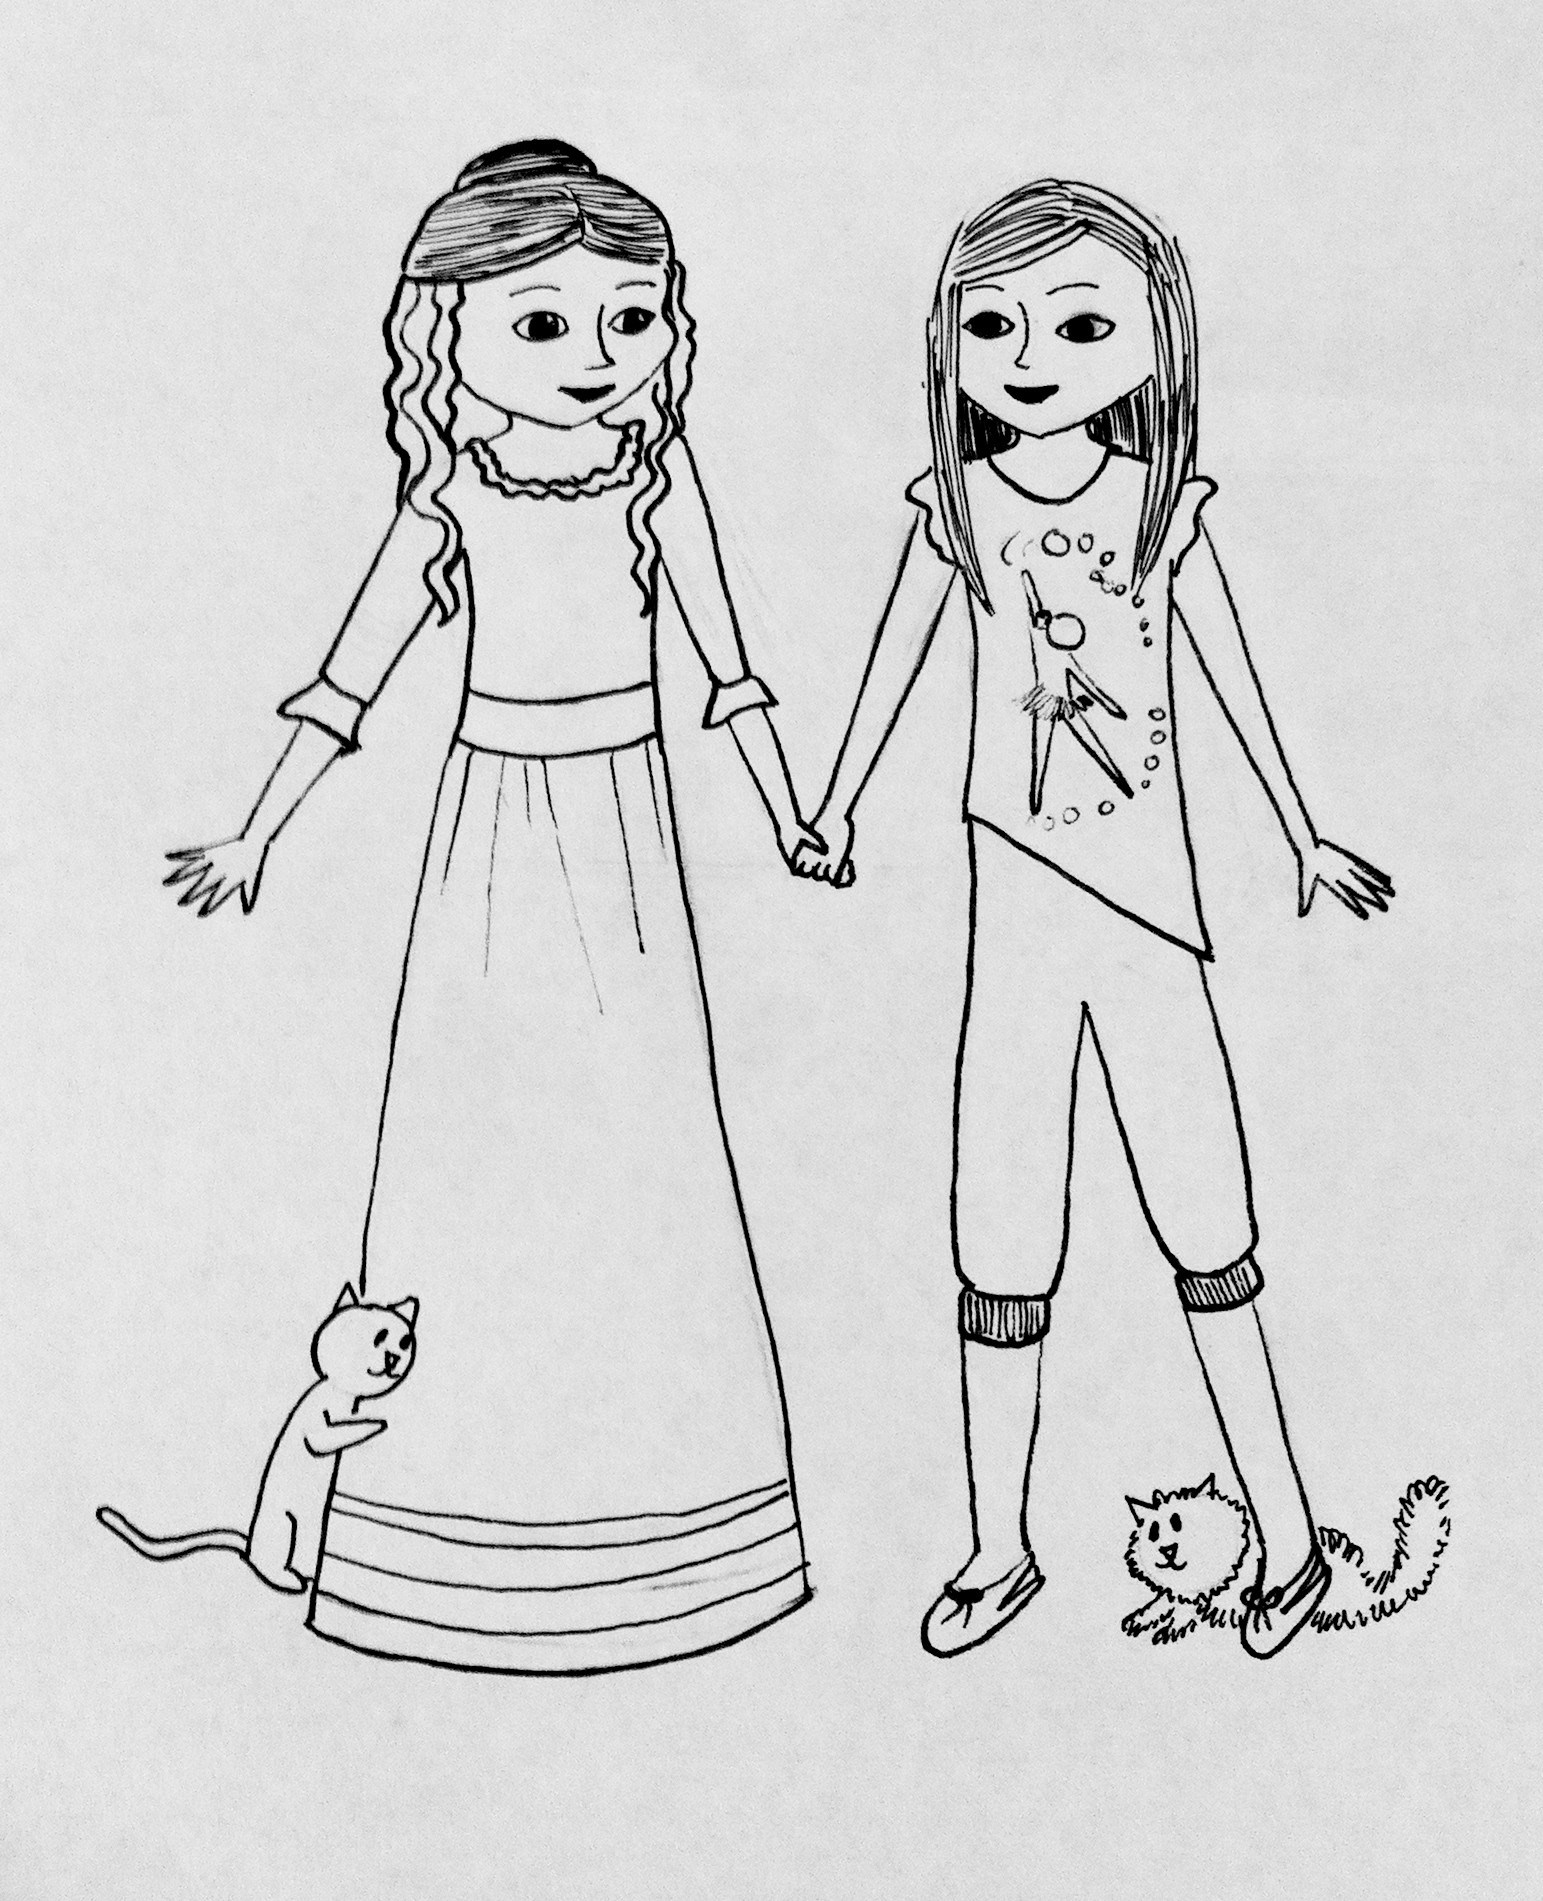 American Girl Isabelle Coloring Pages
 More American Girl Coloring Pages